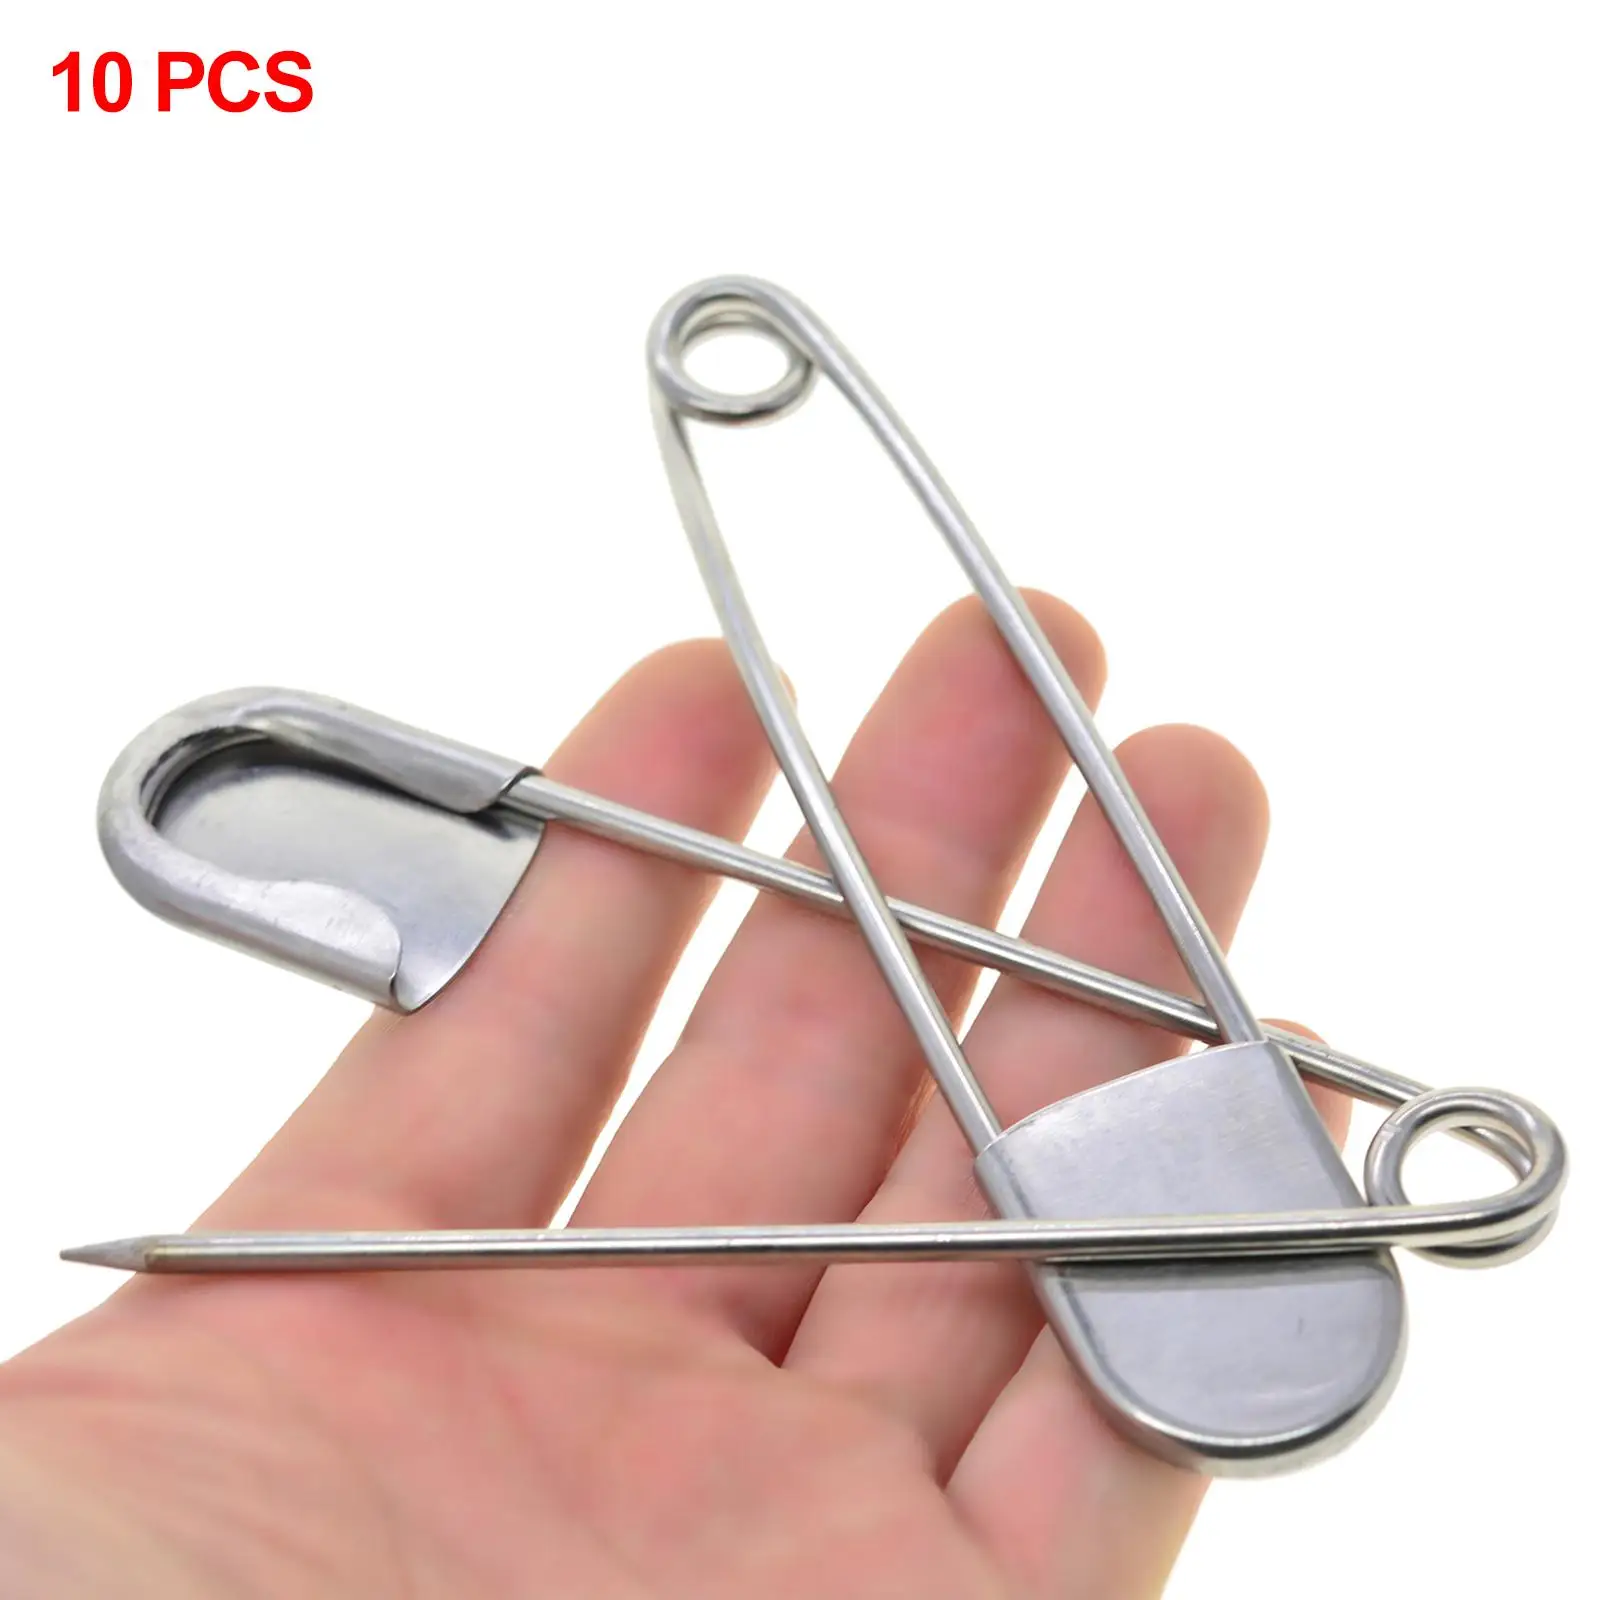 10 Pieces 5 inch Extra Large Safety Pins Jumbo Heavy Duty Stainless Steel for